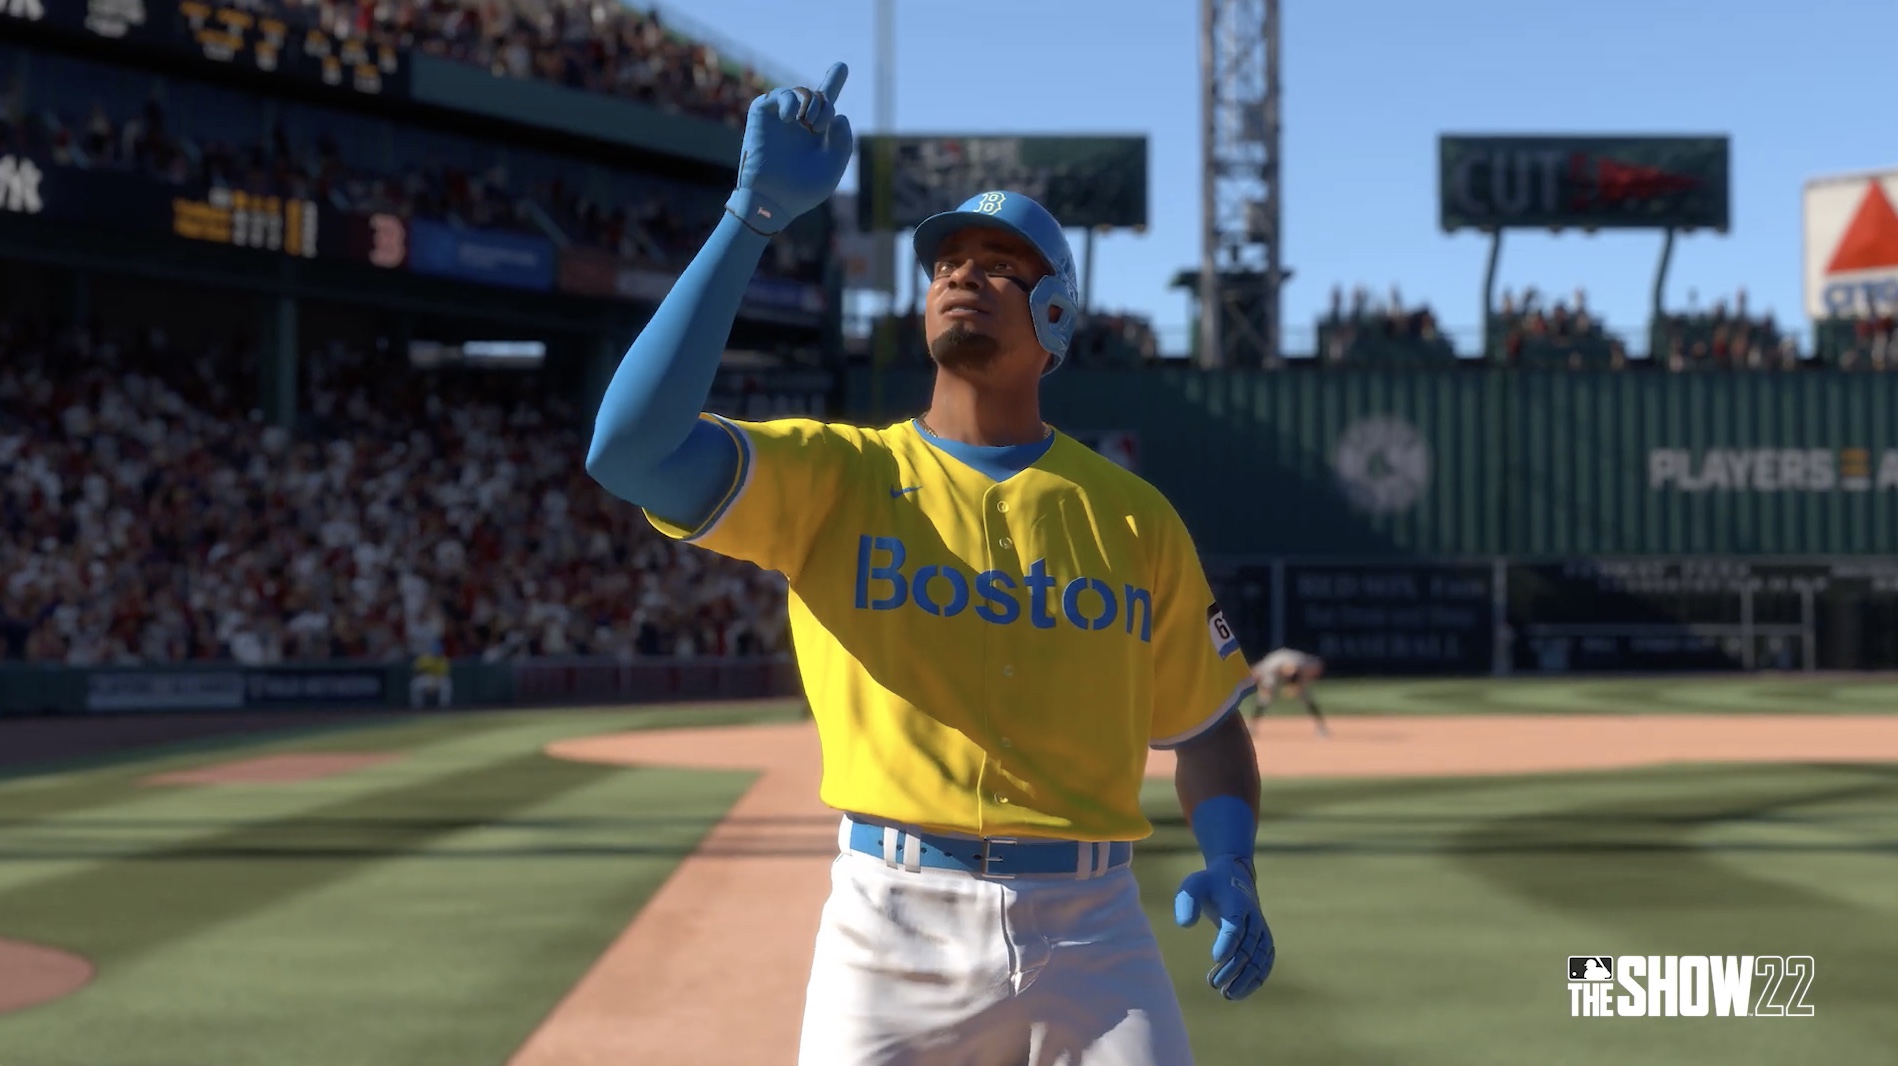 New Royals uniforms will be available on MLB The Show